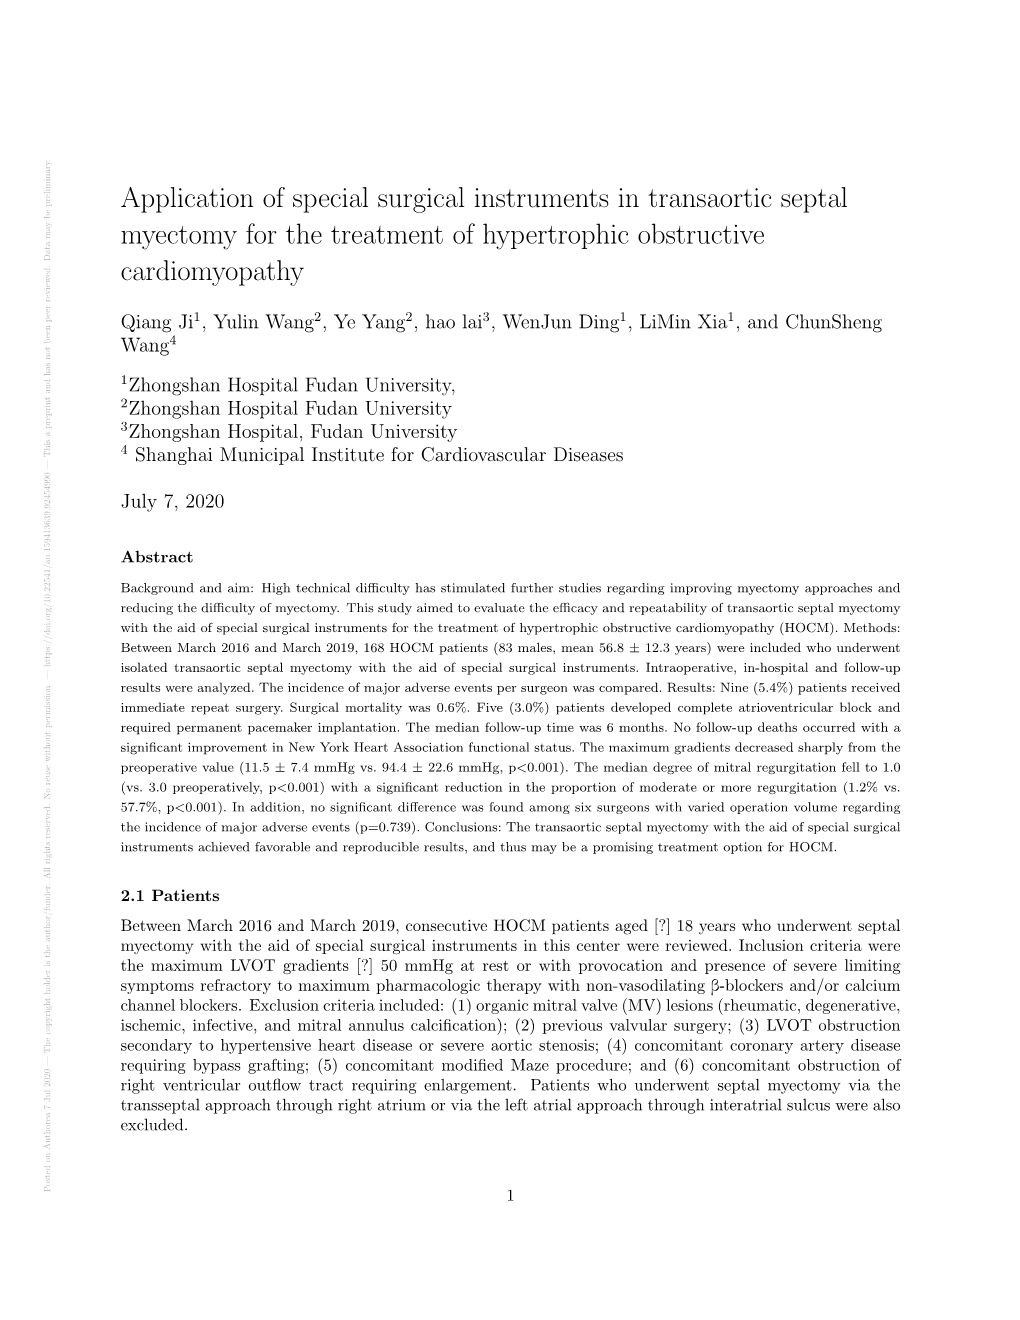 Application of Special Surgical Instruments in Transaortic Septal